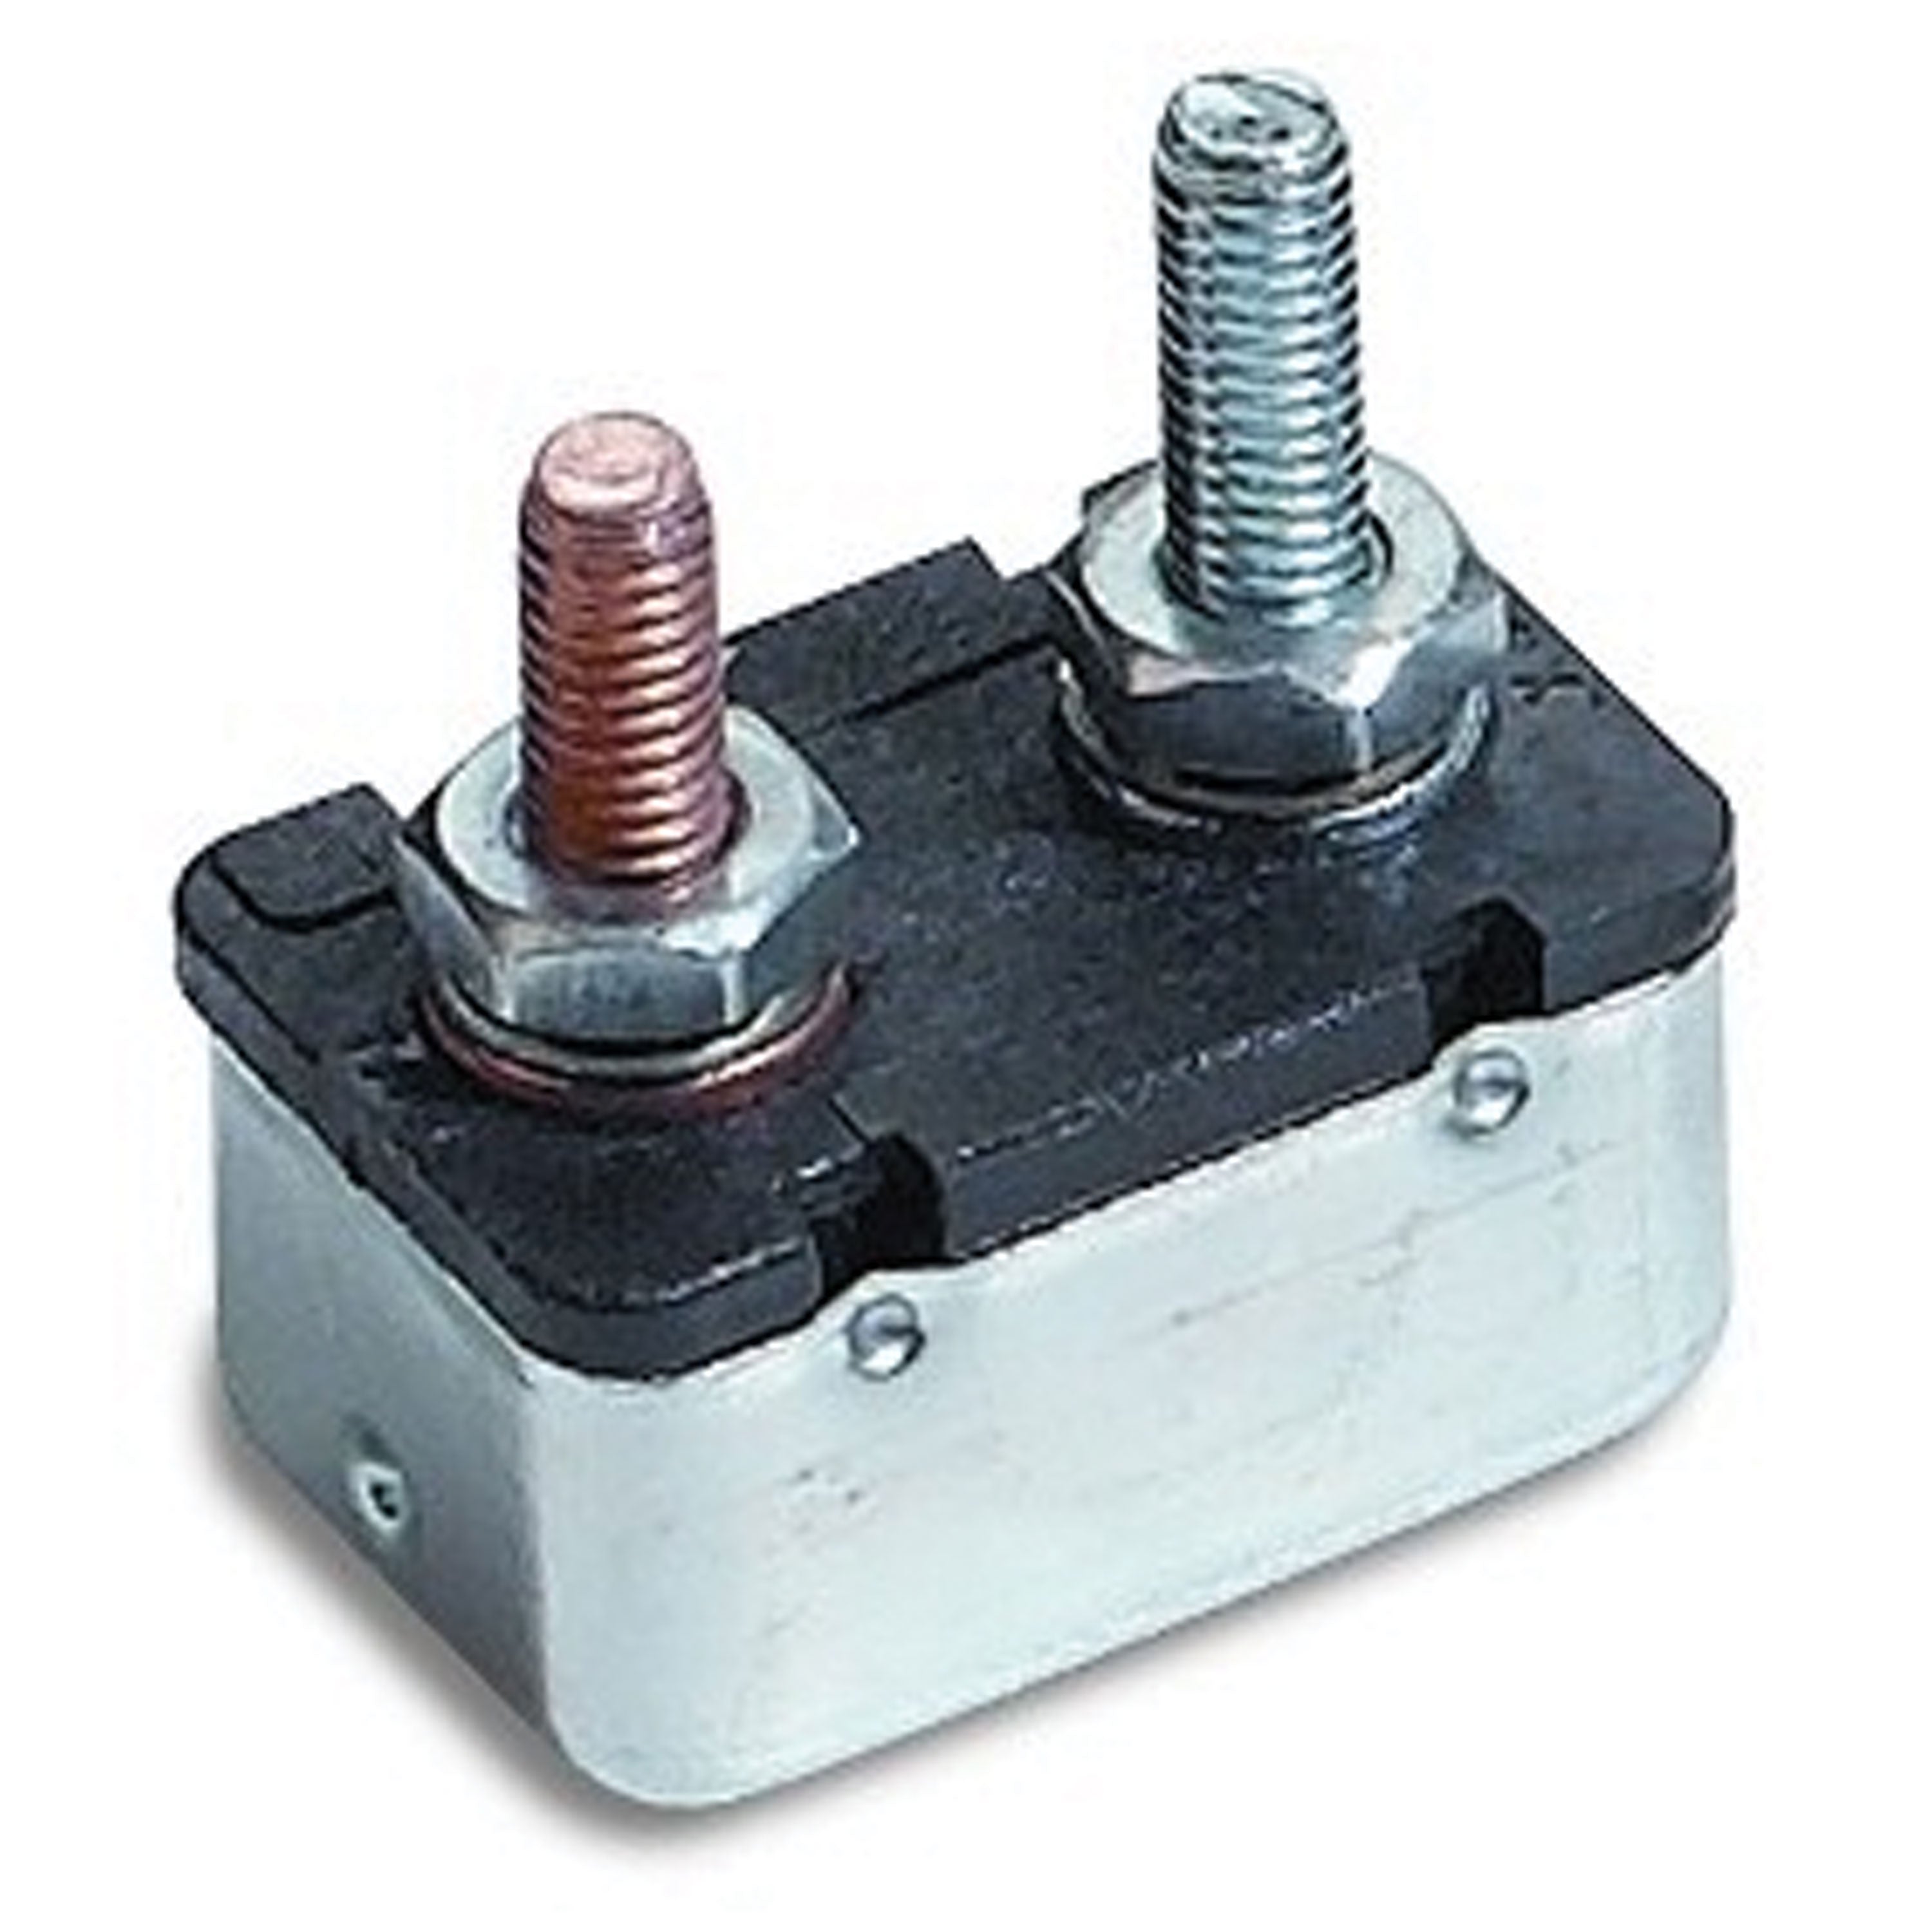 WirthCo 31180 Blade-Style Circuit Breaker - 10A